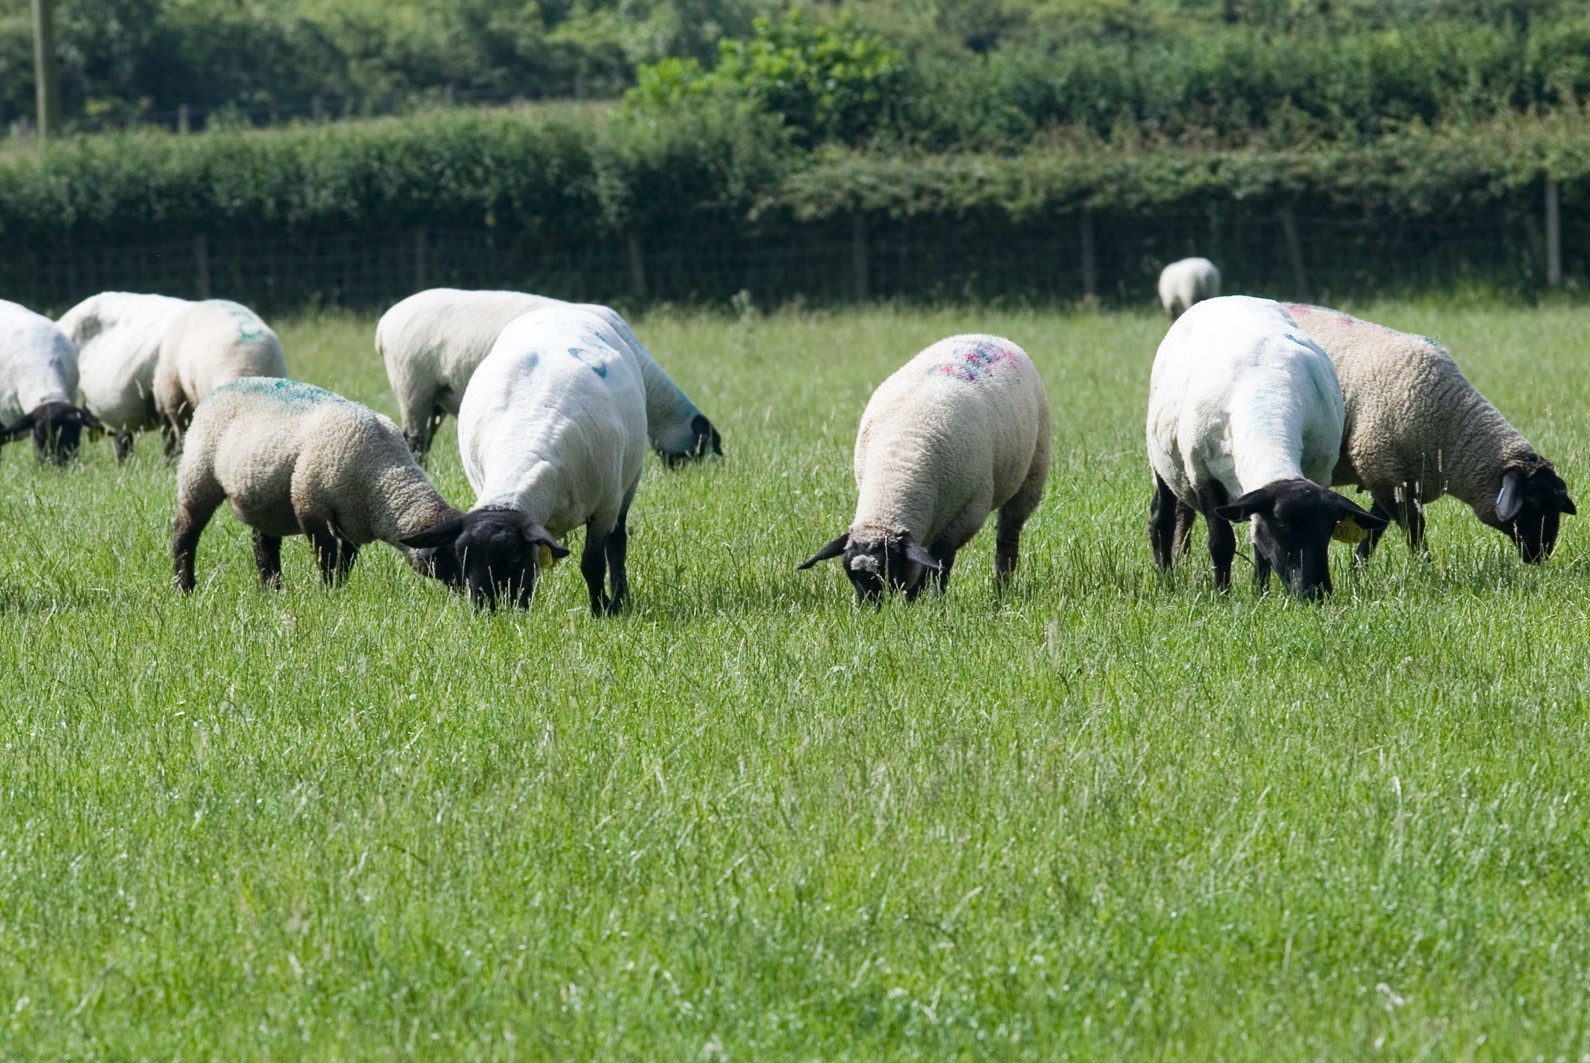 Controlling parasite diseases is vital for the health, welfare and economic sustainability of the UK sheep industry